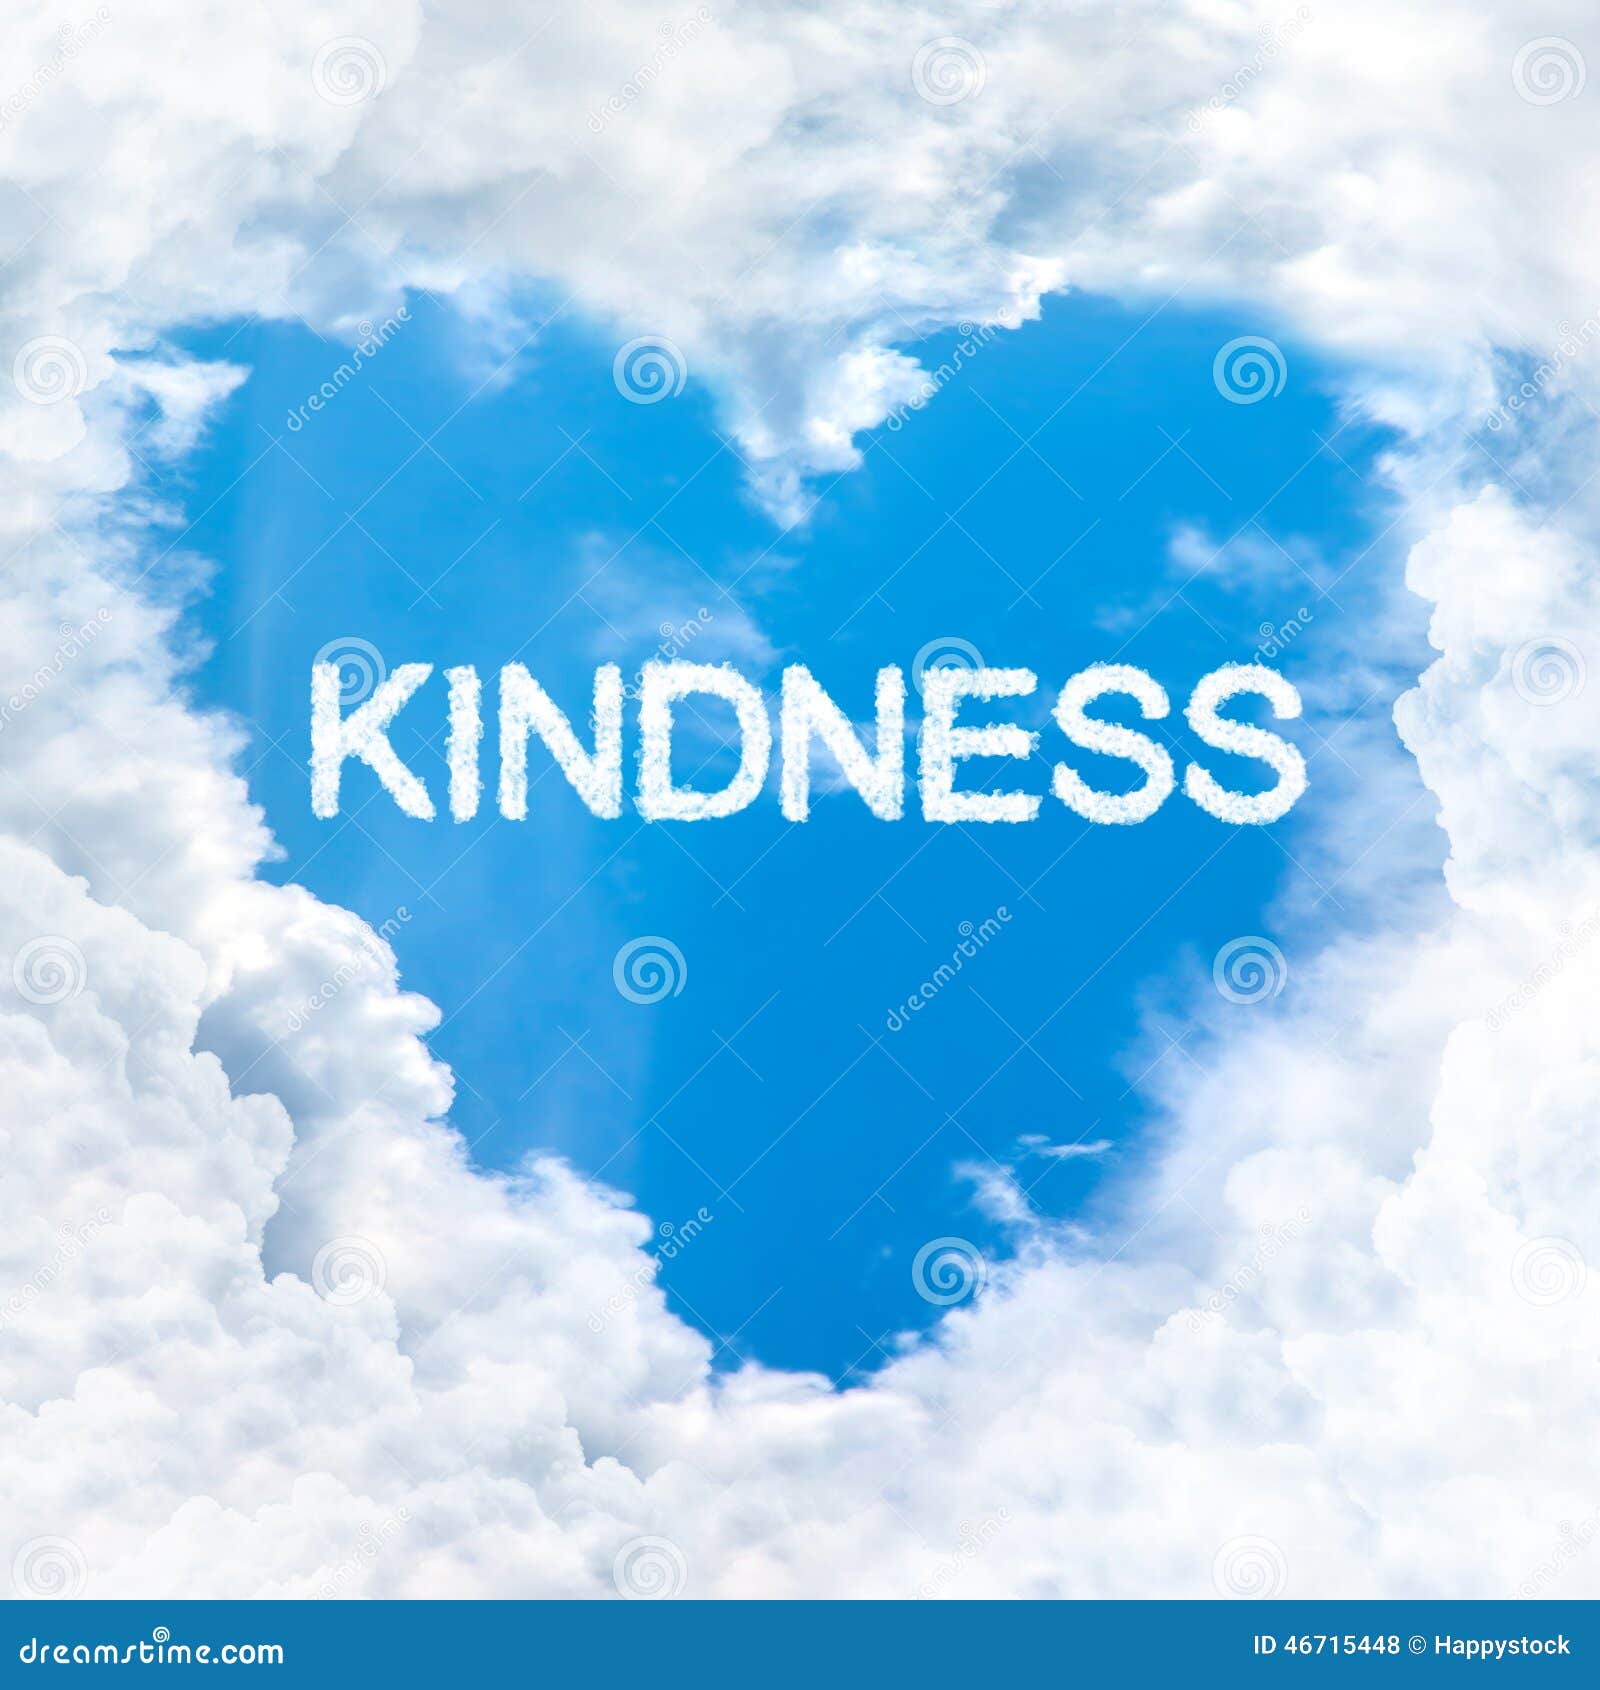 clipart of kindness - photo #43